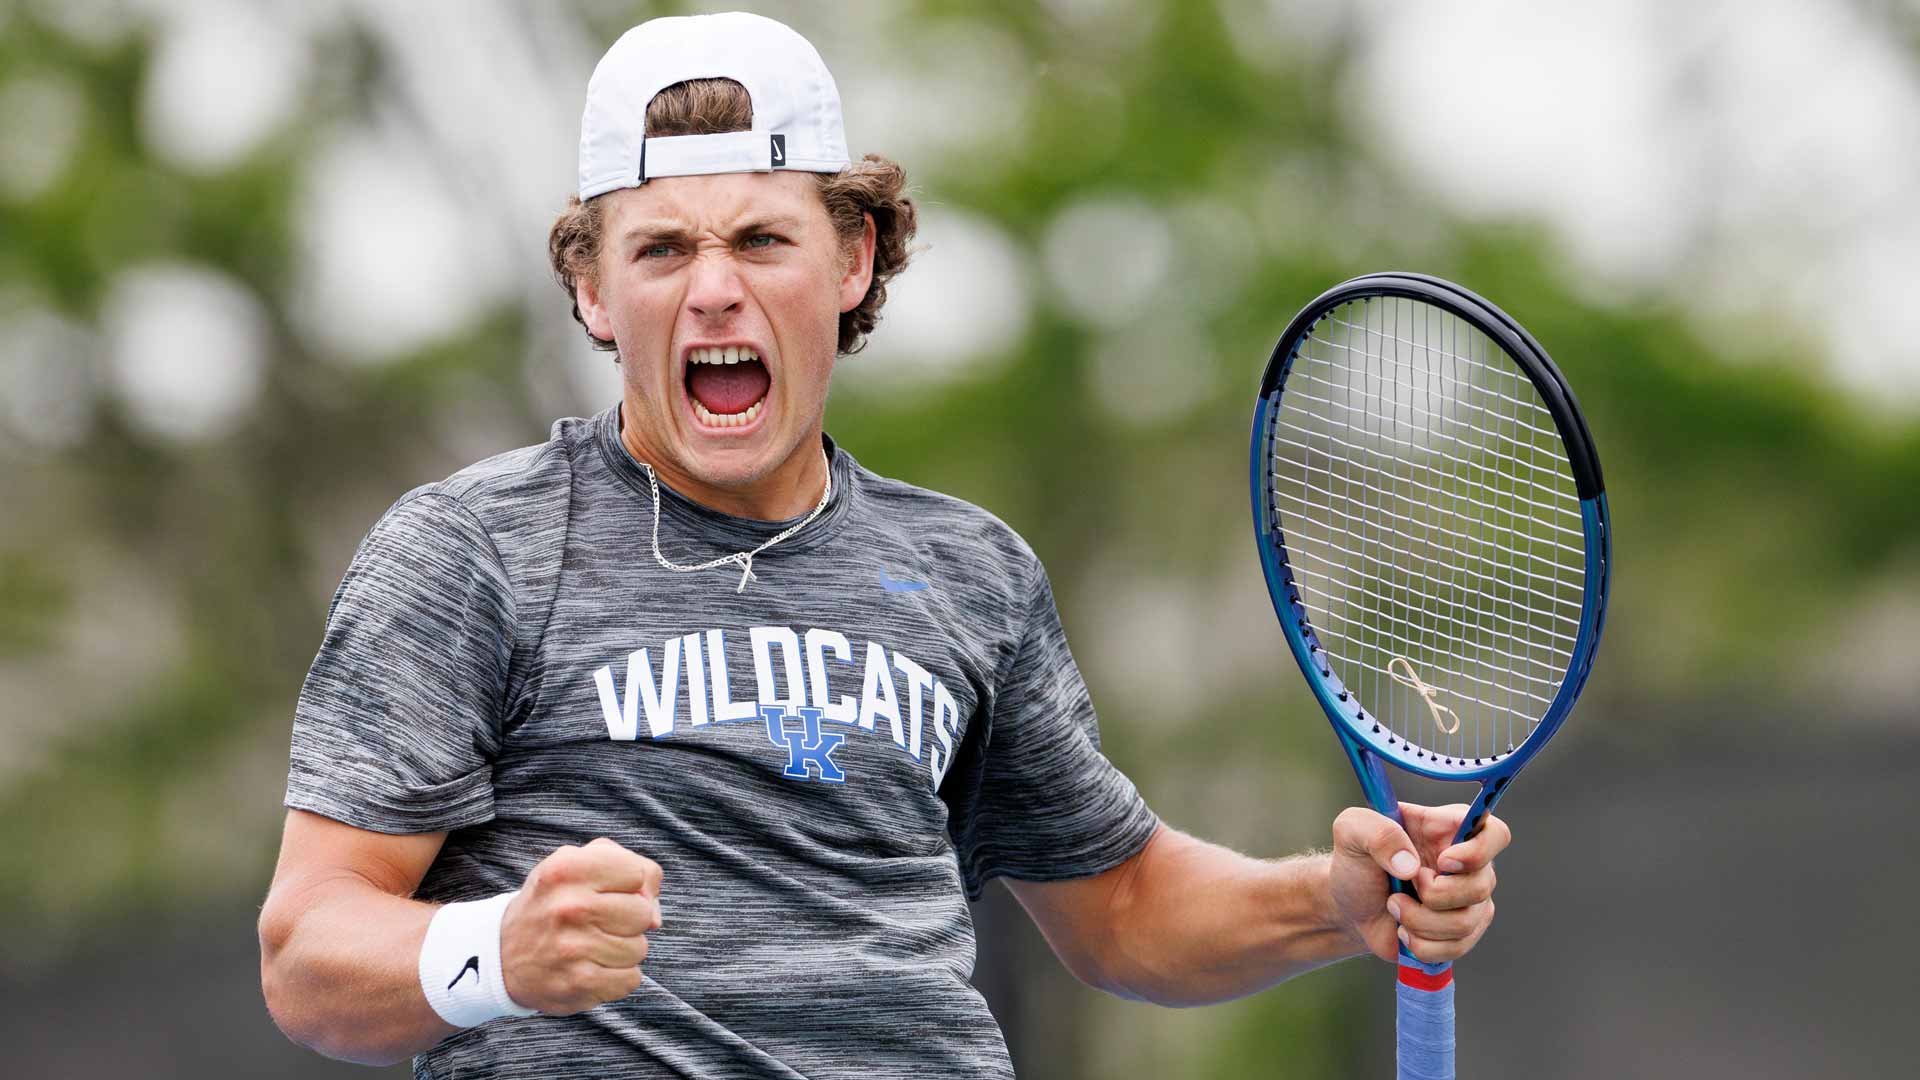 Liam Draxl was a three-time ITA All-American at the University of Kentucky.